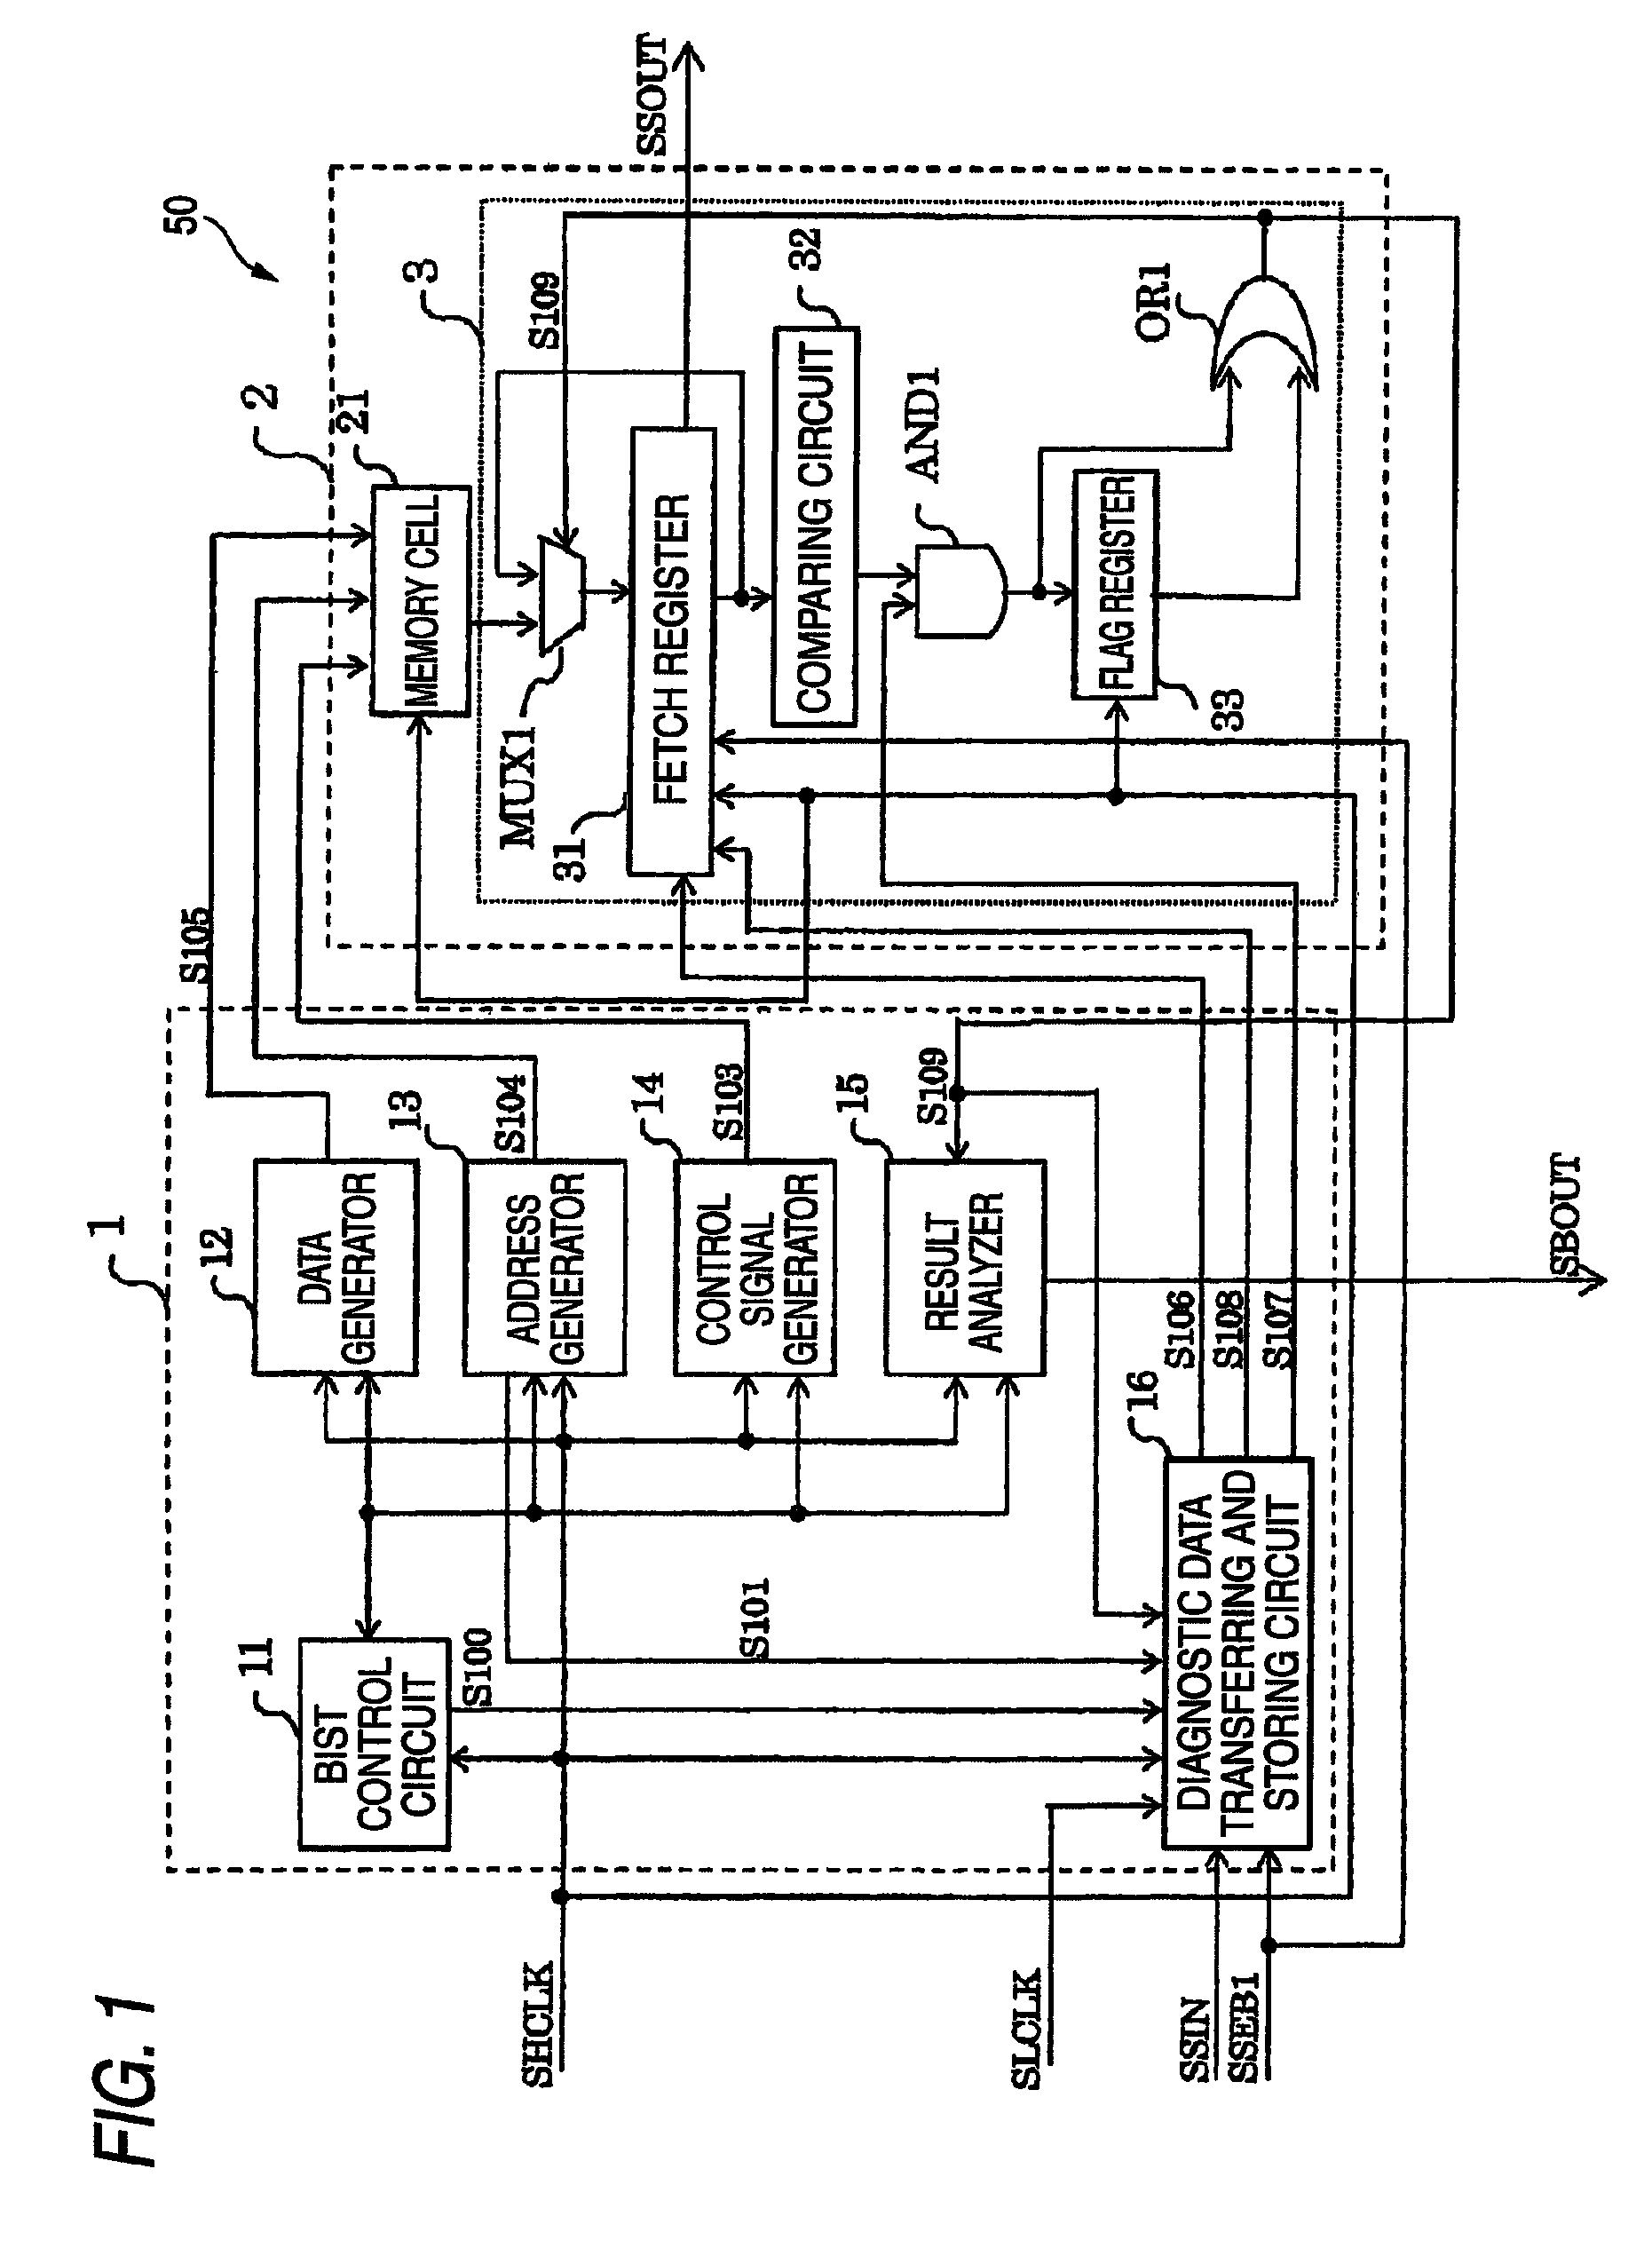 Built-in self testing circuit with fault diagnostic capability